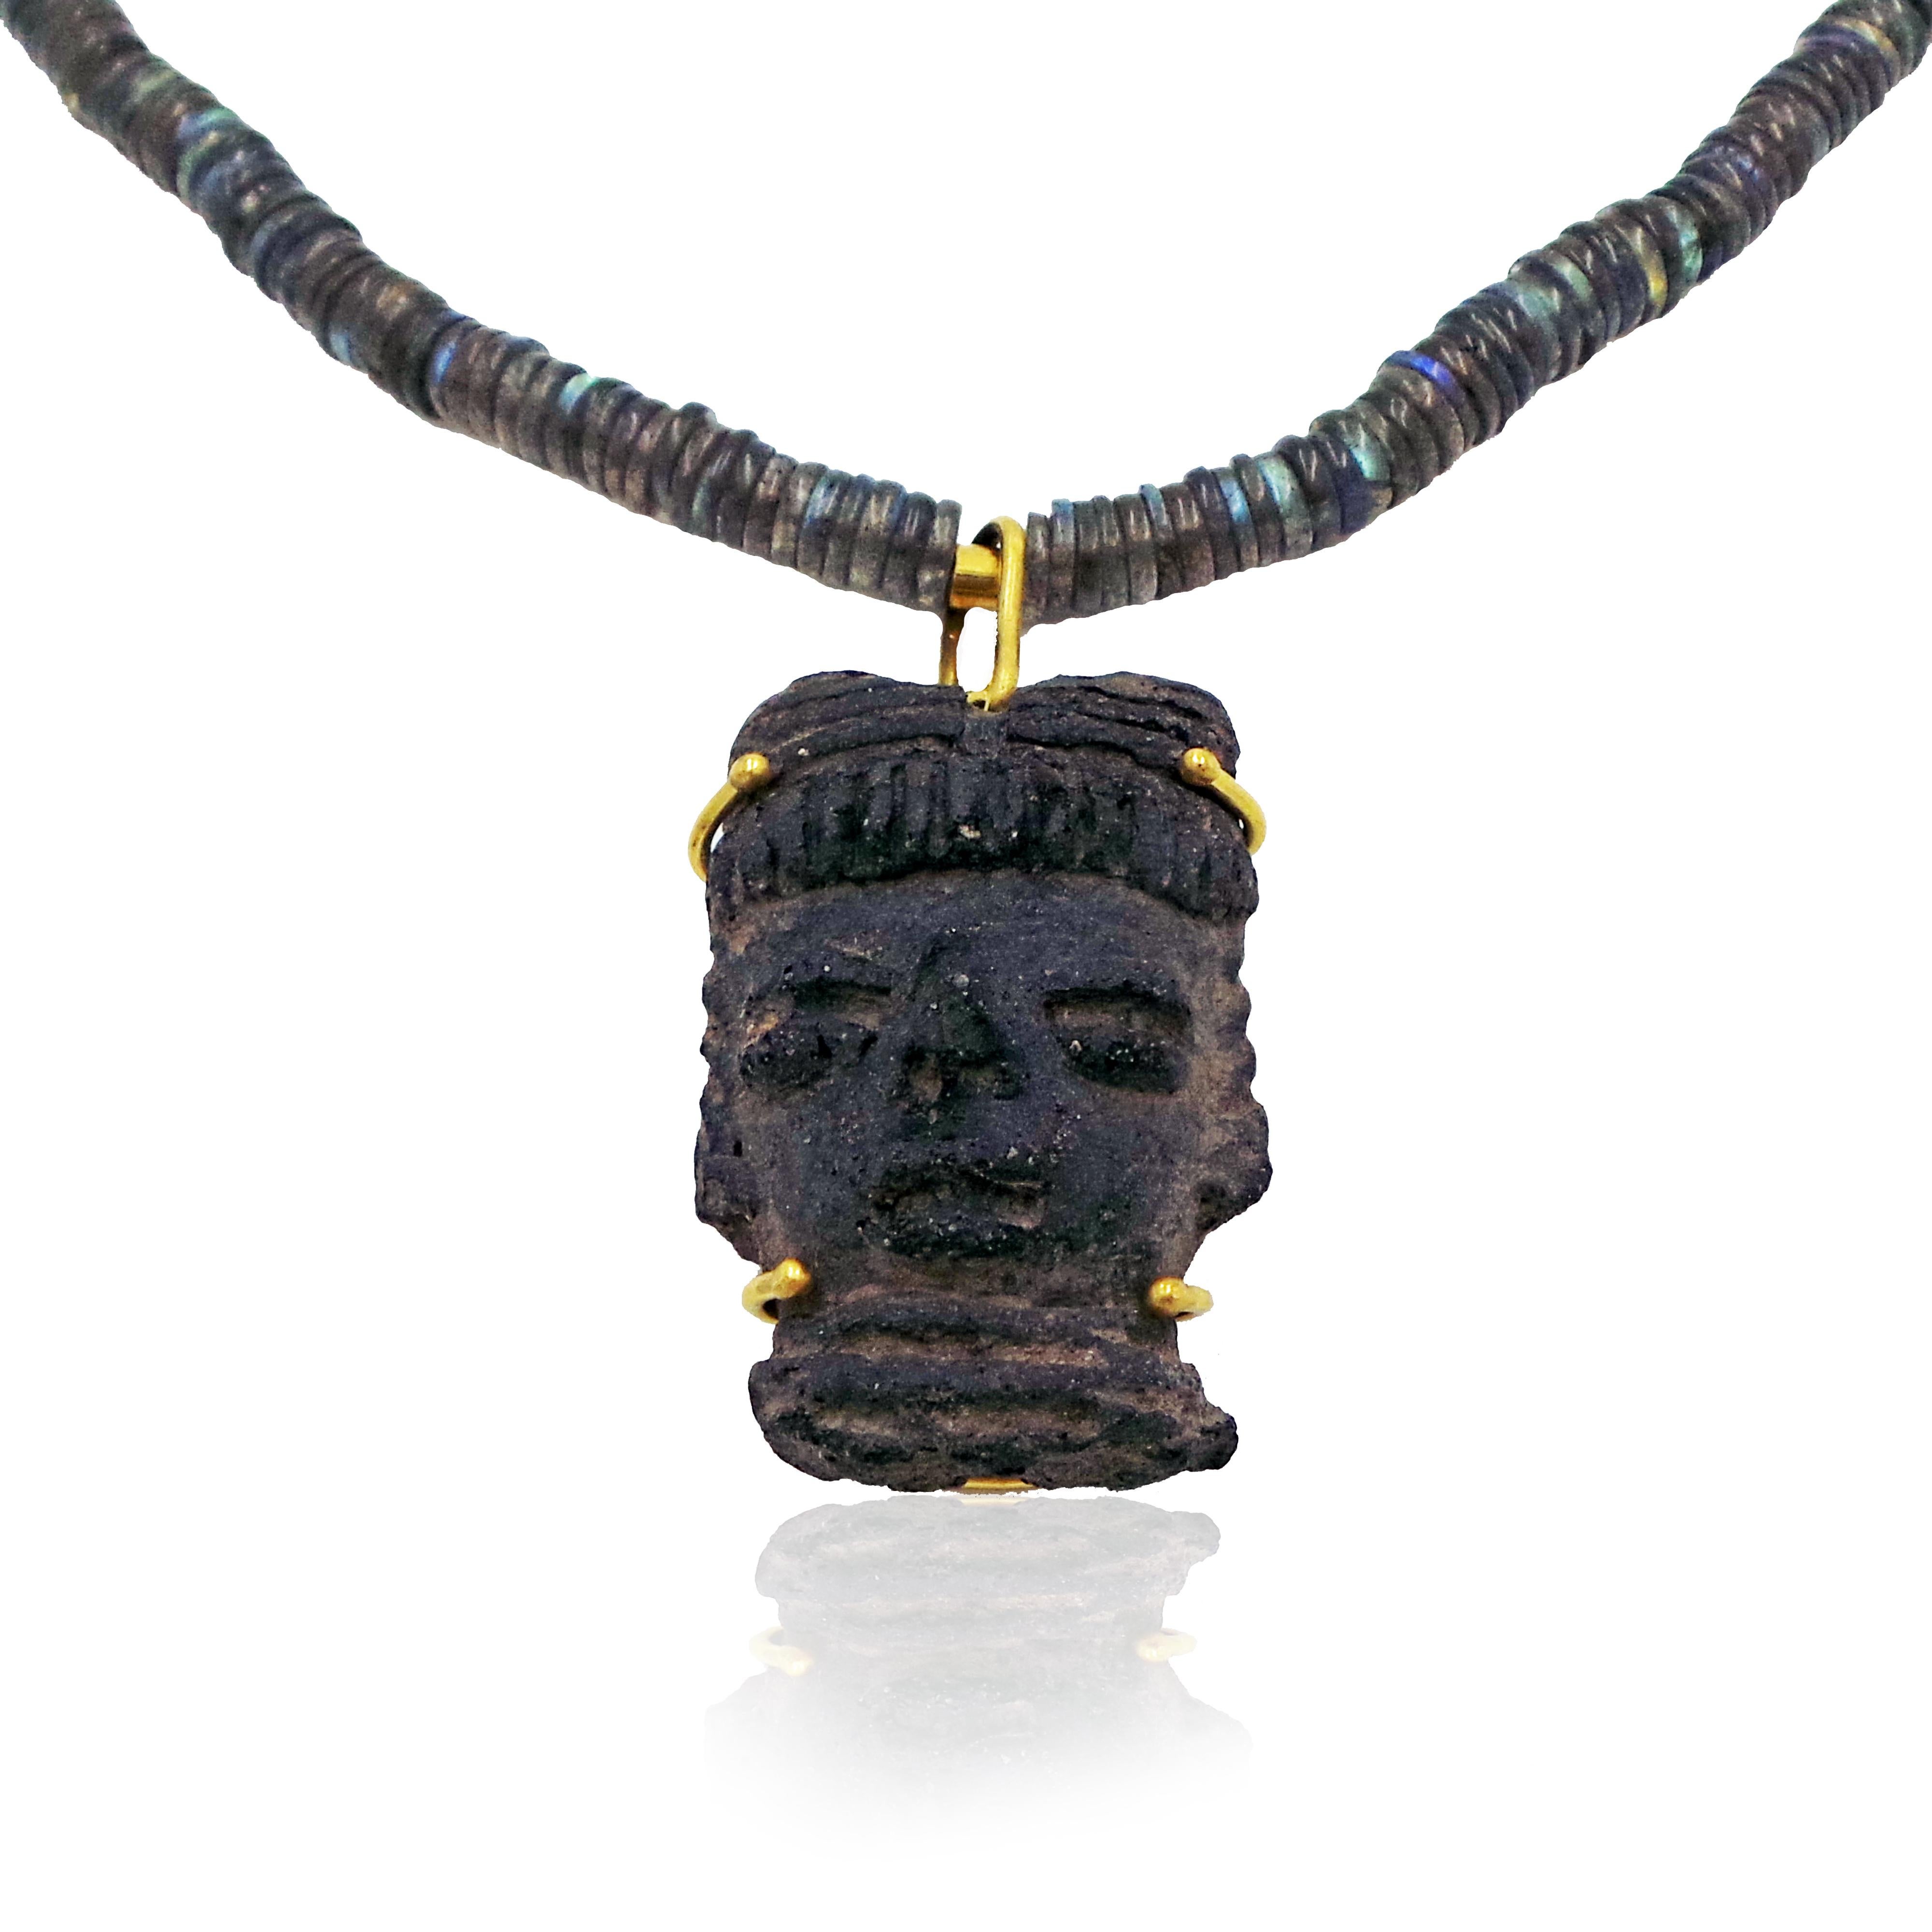 Pre-Columbian carved stone head artfact is set in 22k yellow gold, and fashioned with a hook-on bail for easy transfer to your other chains, leather cords or beaded/ strung necklaces. Carved stone pendant with hook bail is 2 inches or 51mm long.